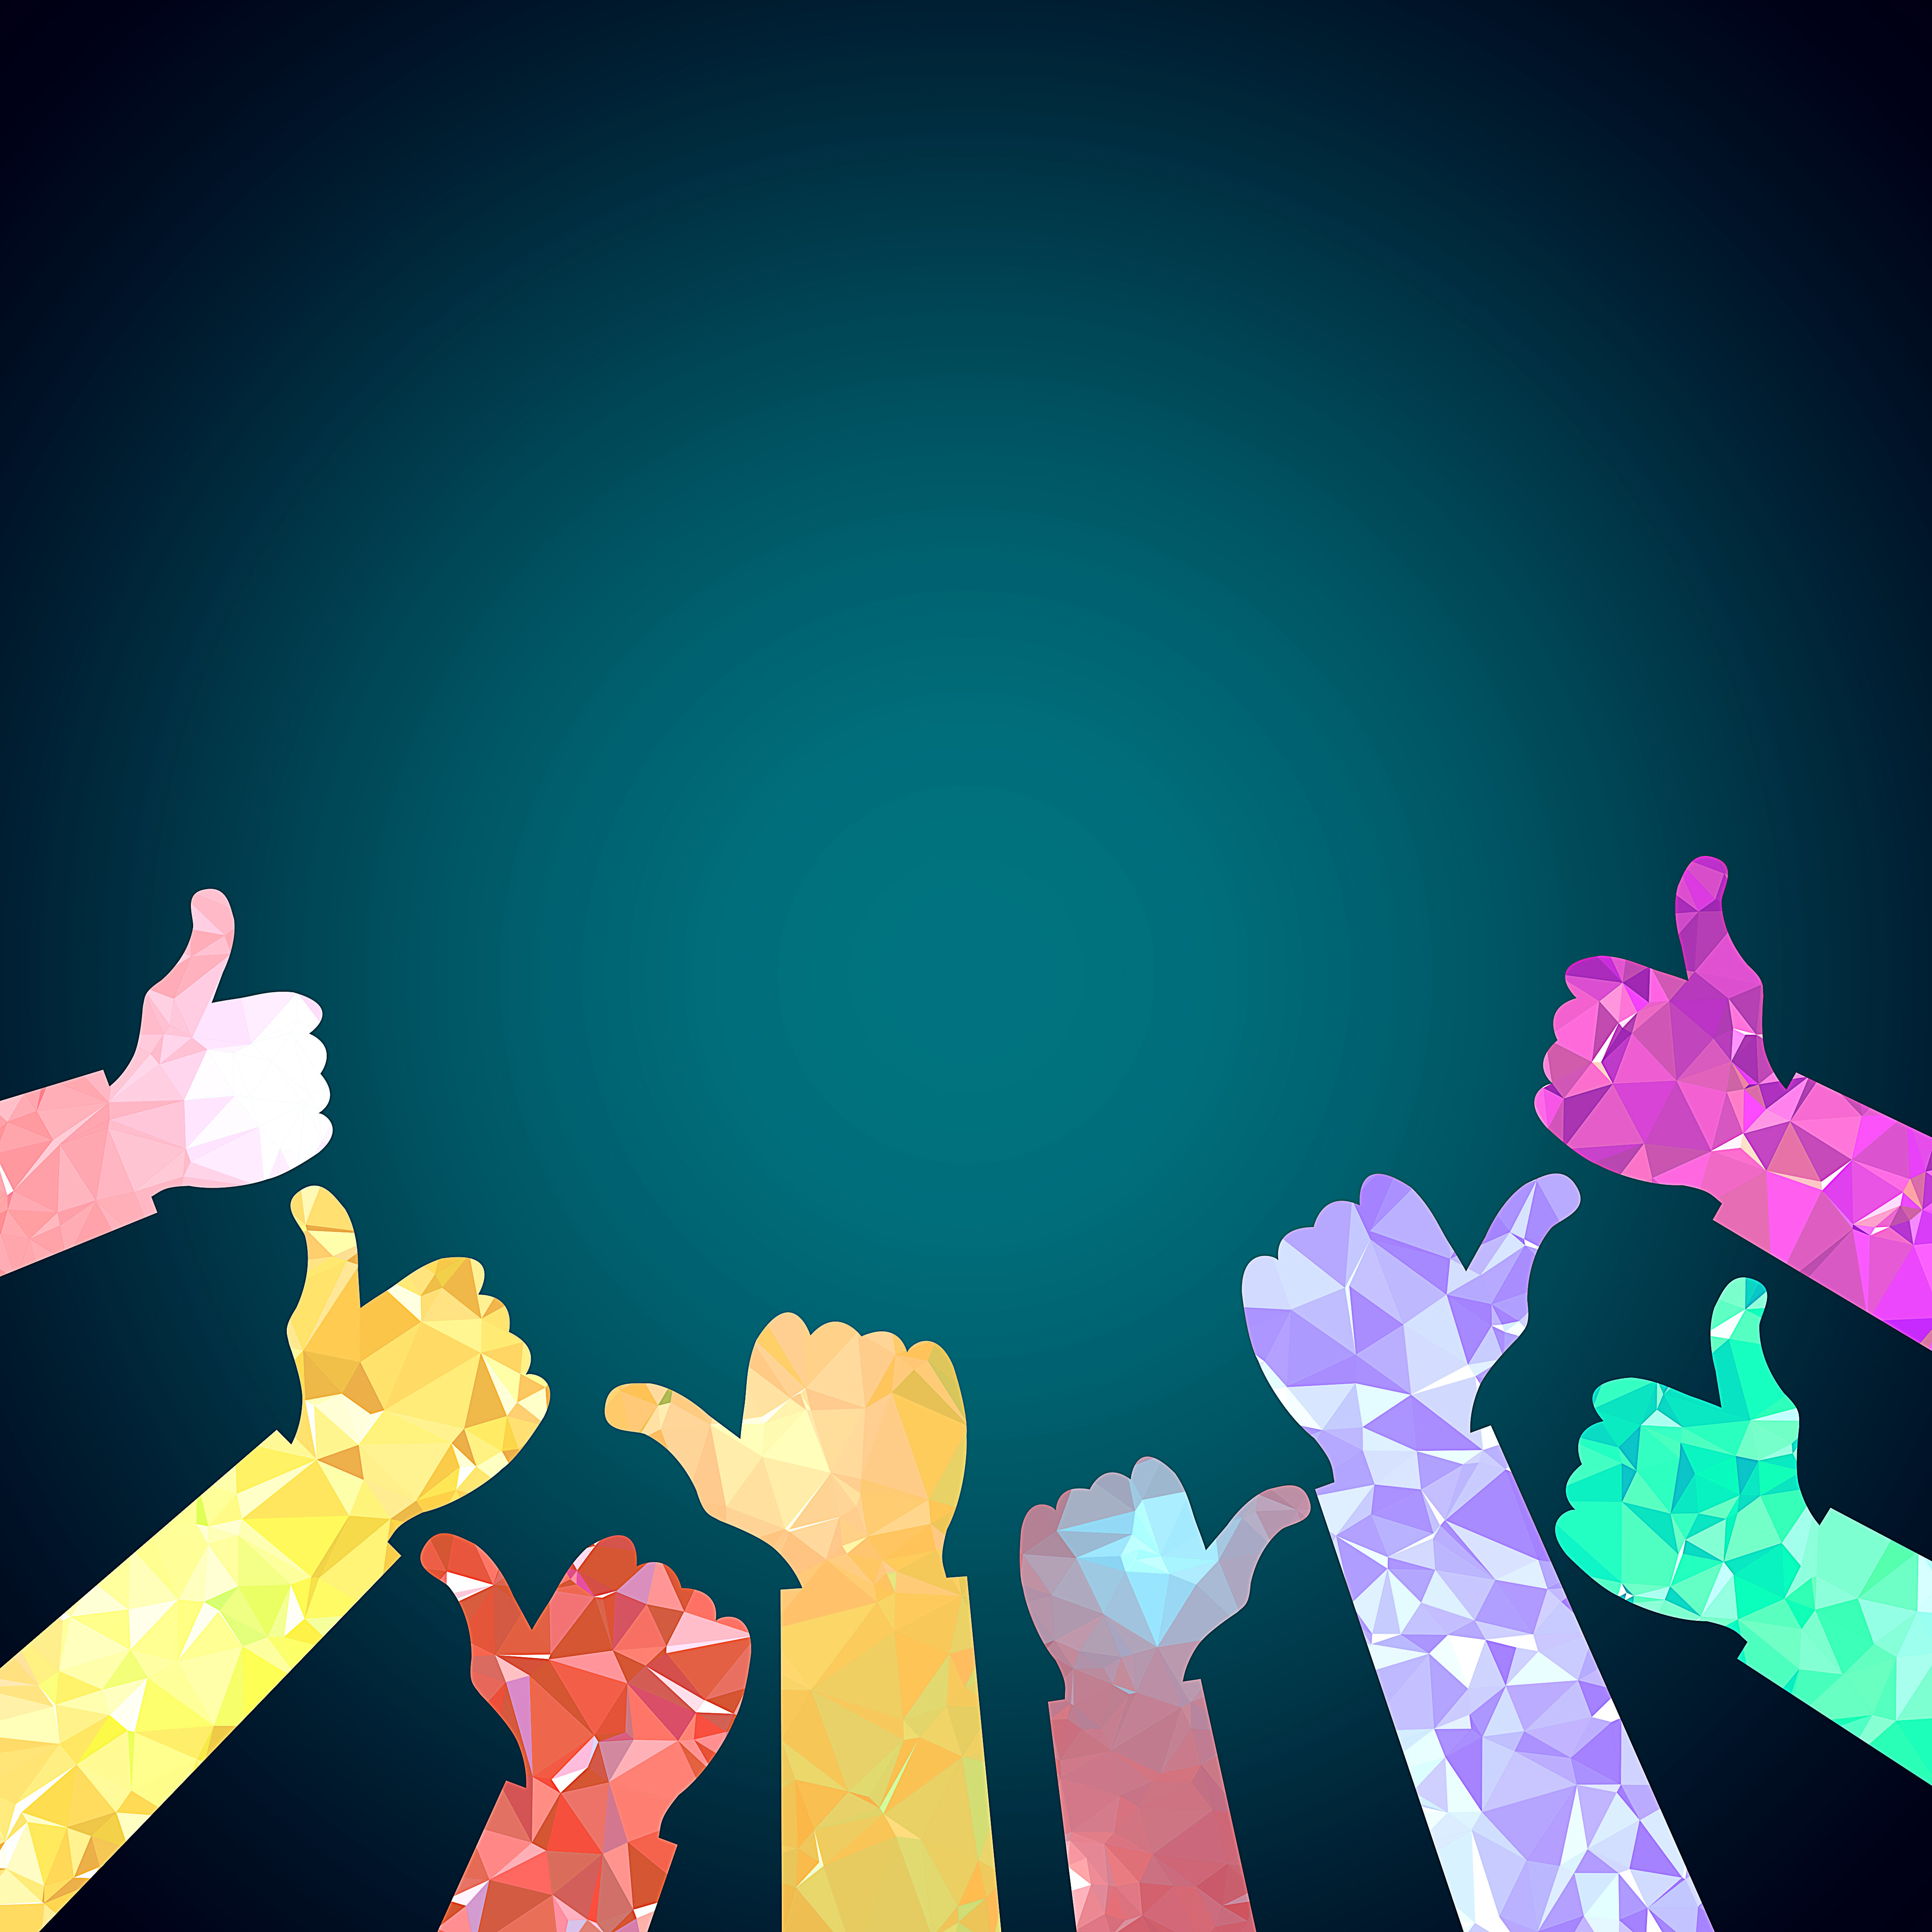 Several colorful hands giving a thumbsup sign